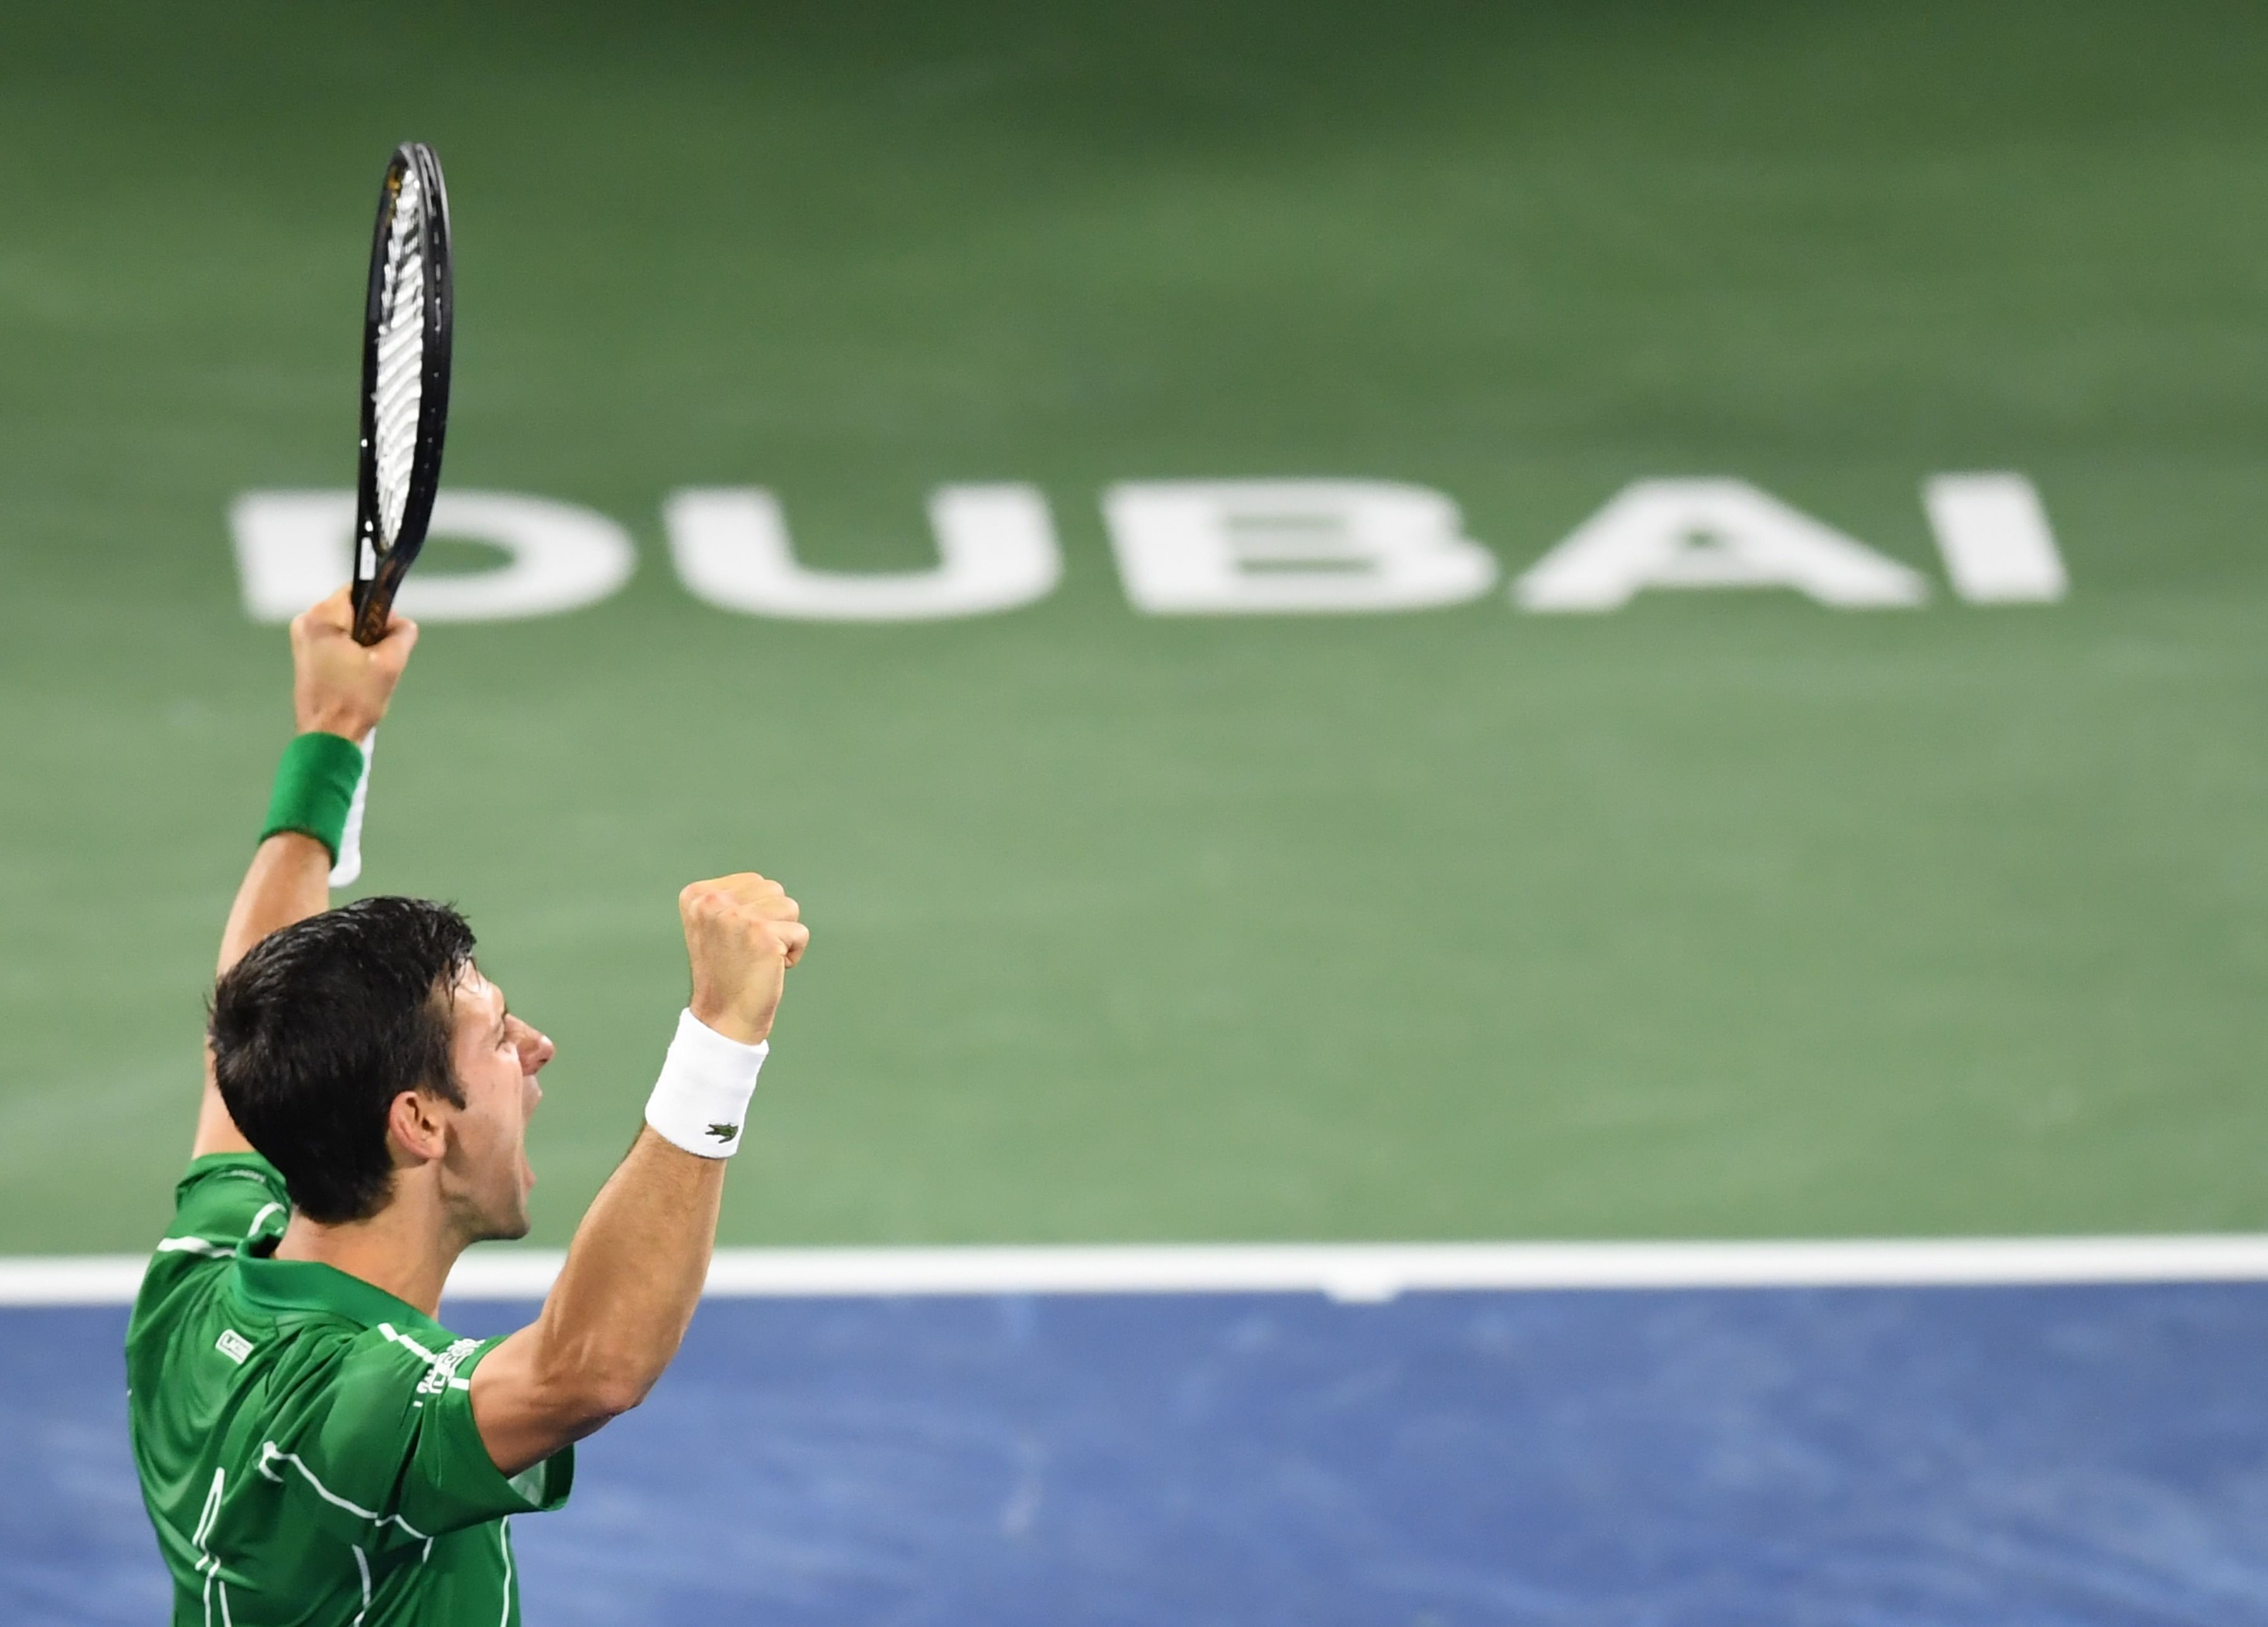 Novak Djokovic of Serbia reacts after winning his semifinal match against Gael Monfils of France during Dubai Duty Free Tennis Championship in the Gulf emirate of Dubai. (AFP Photo)